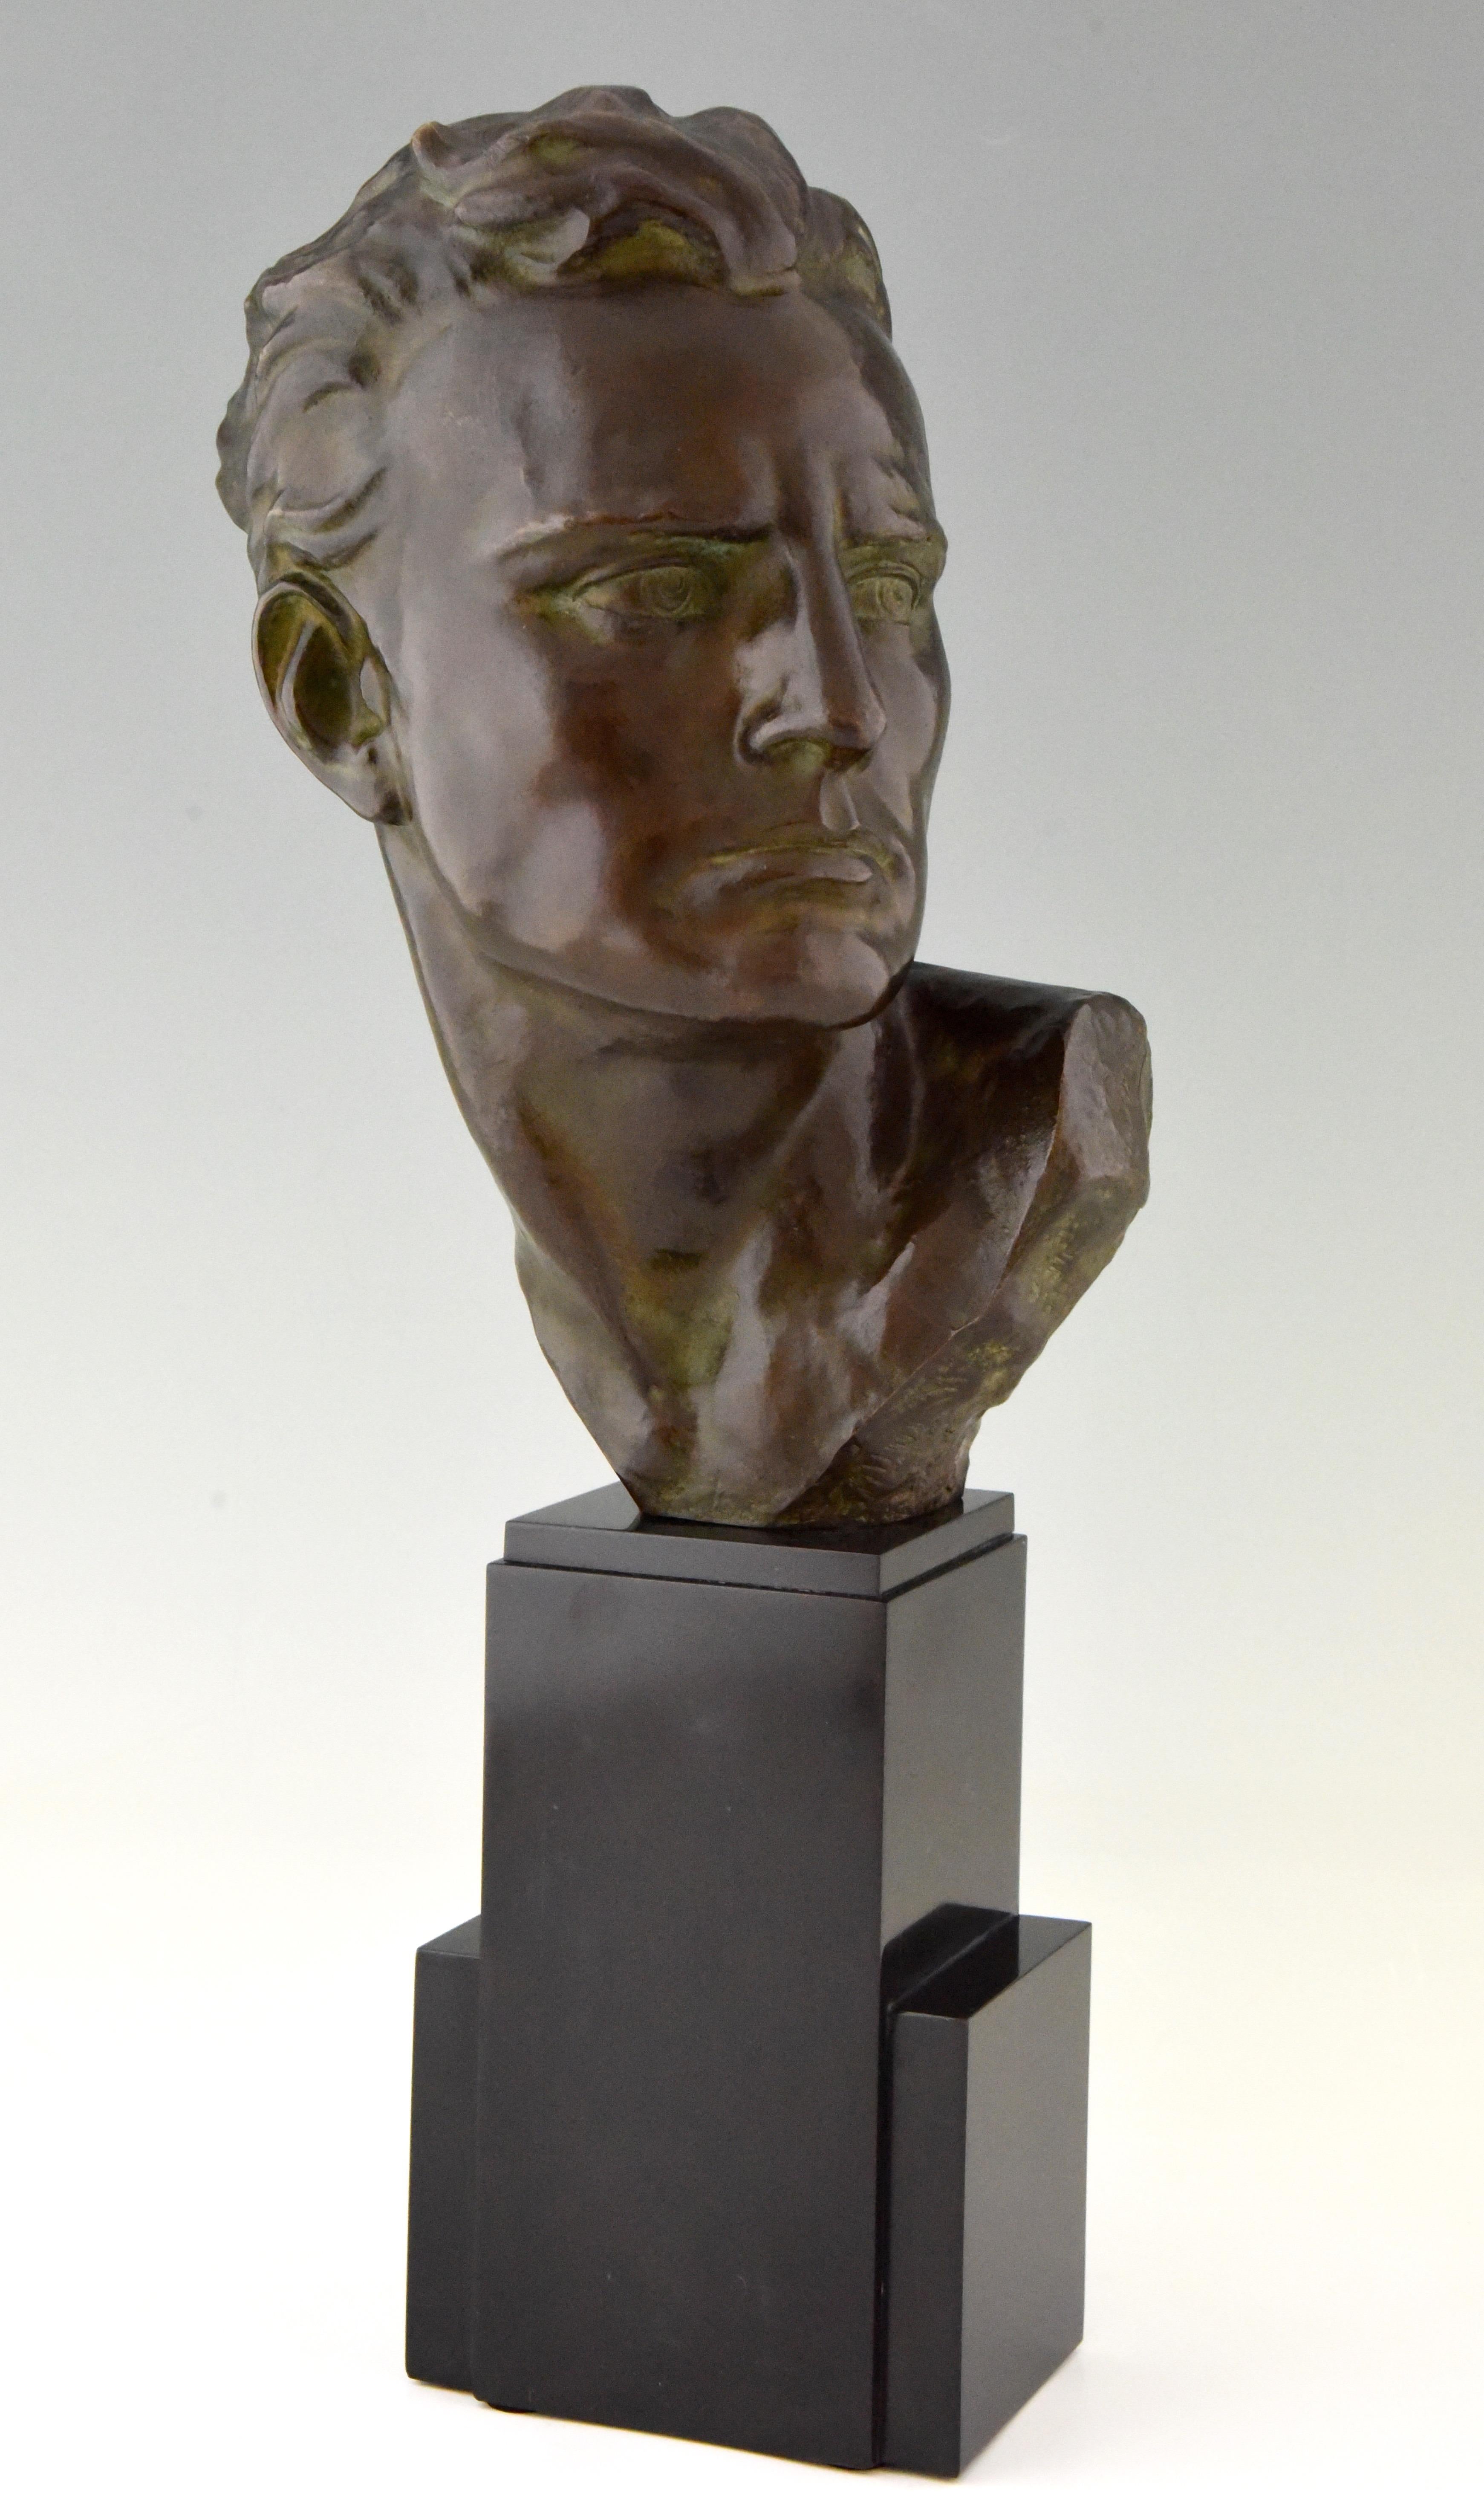 Art Deco bronze sculpture by Ugo Cipriani (1897-1960) a patinated study of a young man mounted on a Belgian Black marble base.
The bronze is signed and marked 